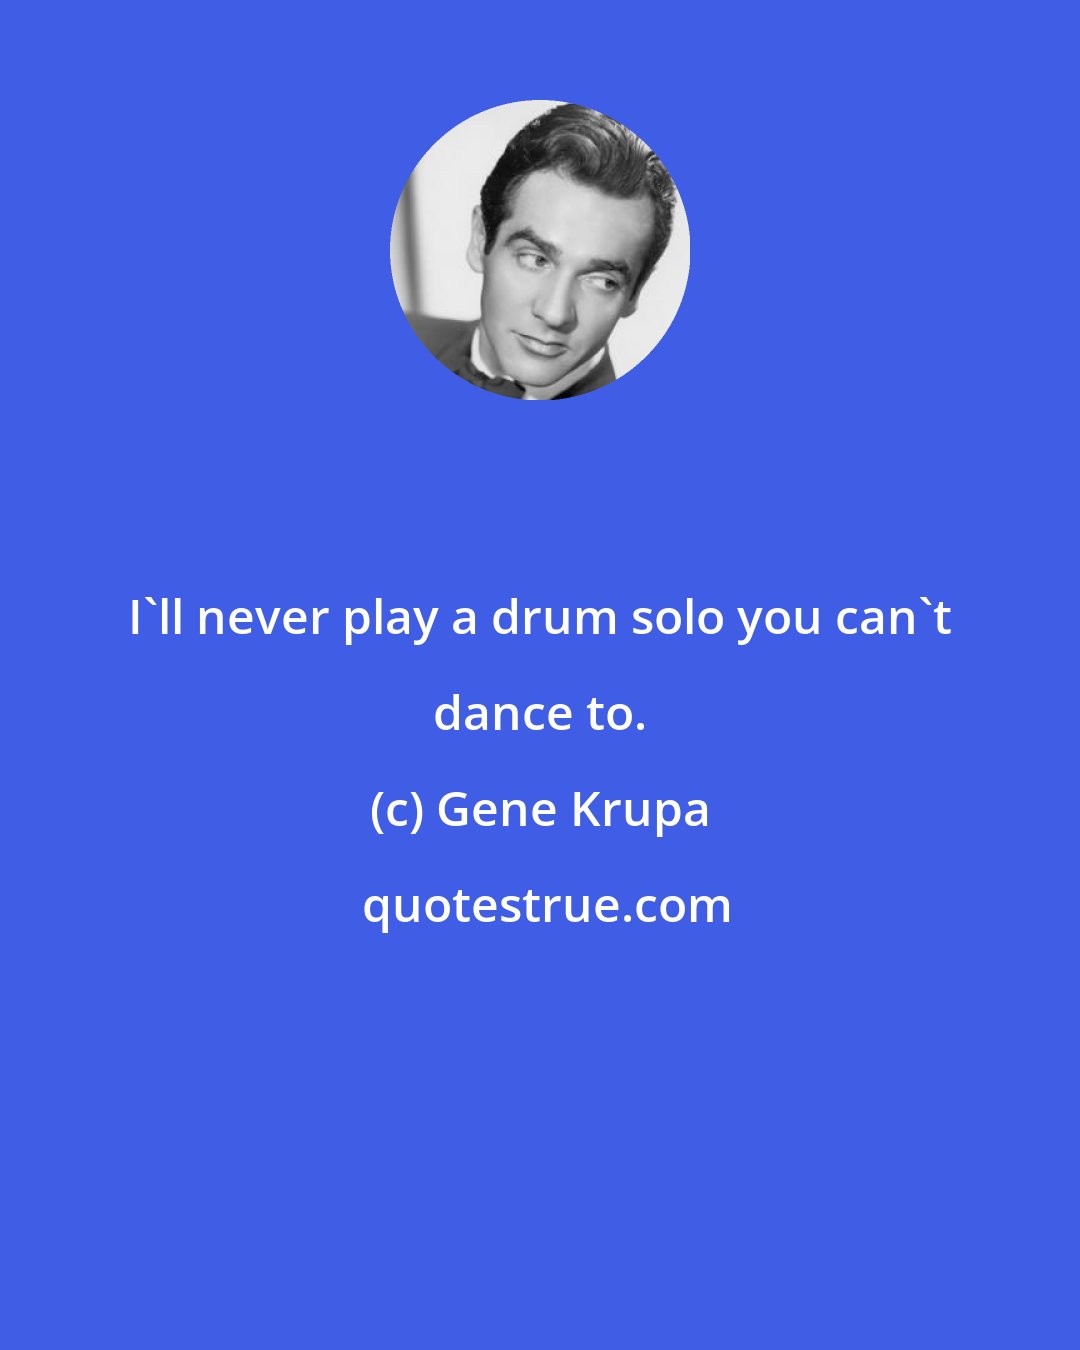 Gene Krupa: I'll never play a drum solo you can't dance to.